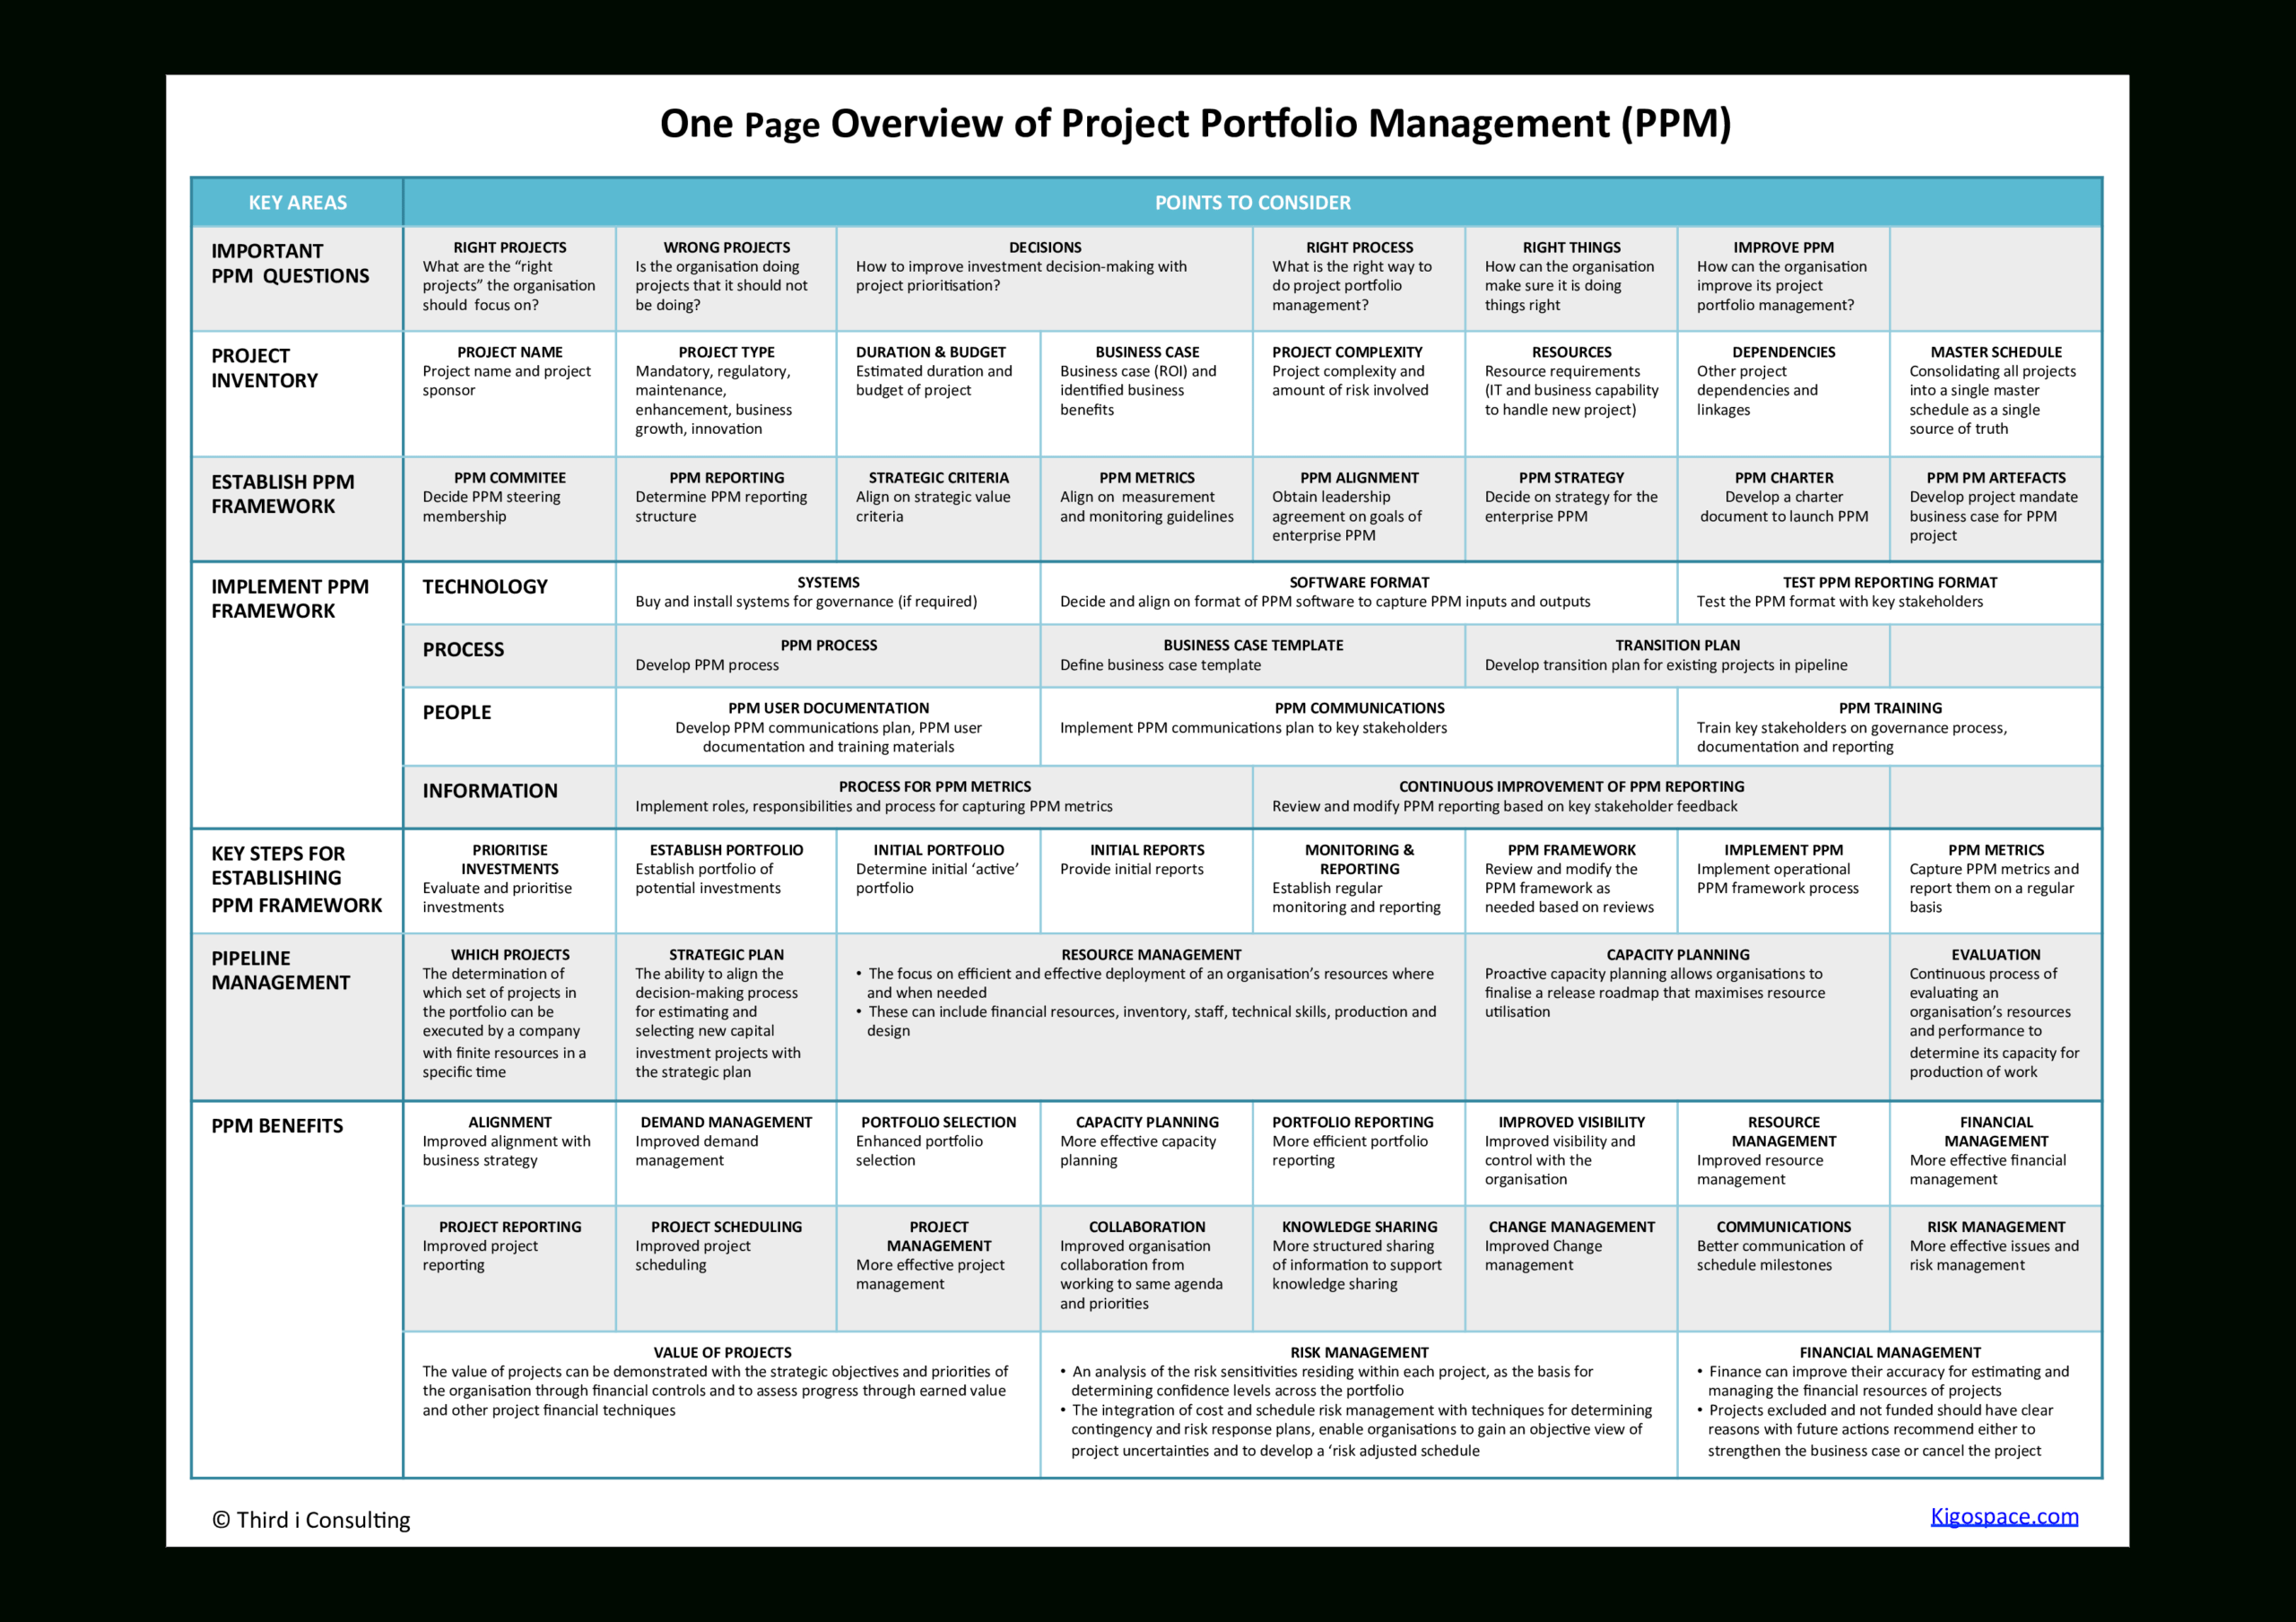 Project Portfolio Management One Page Overview In Portfolio Management Reporting Templates